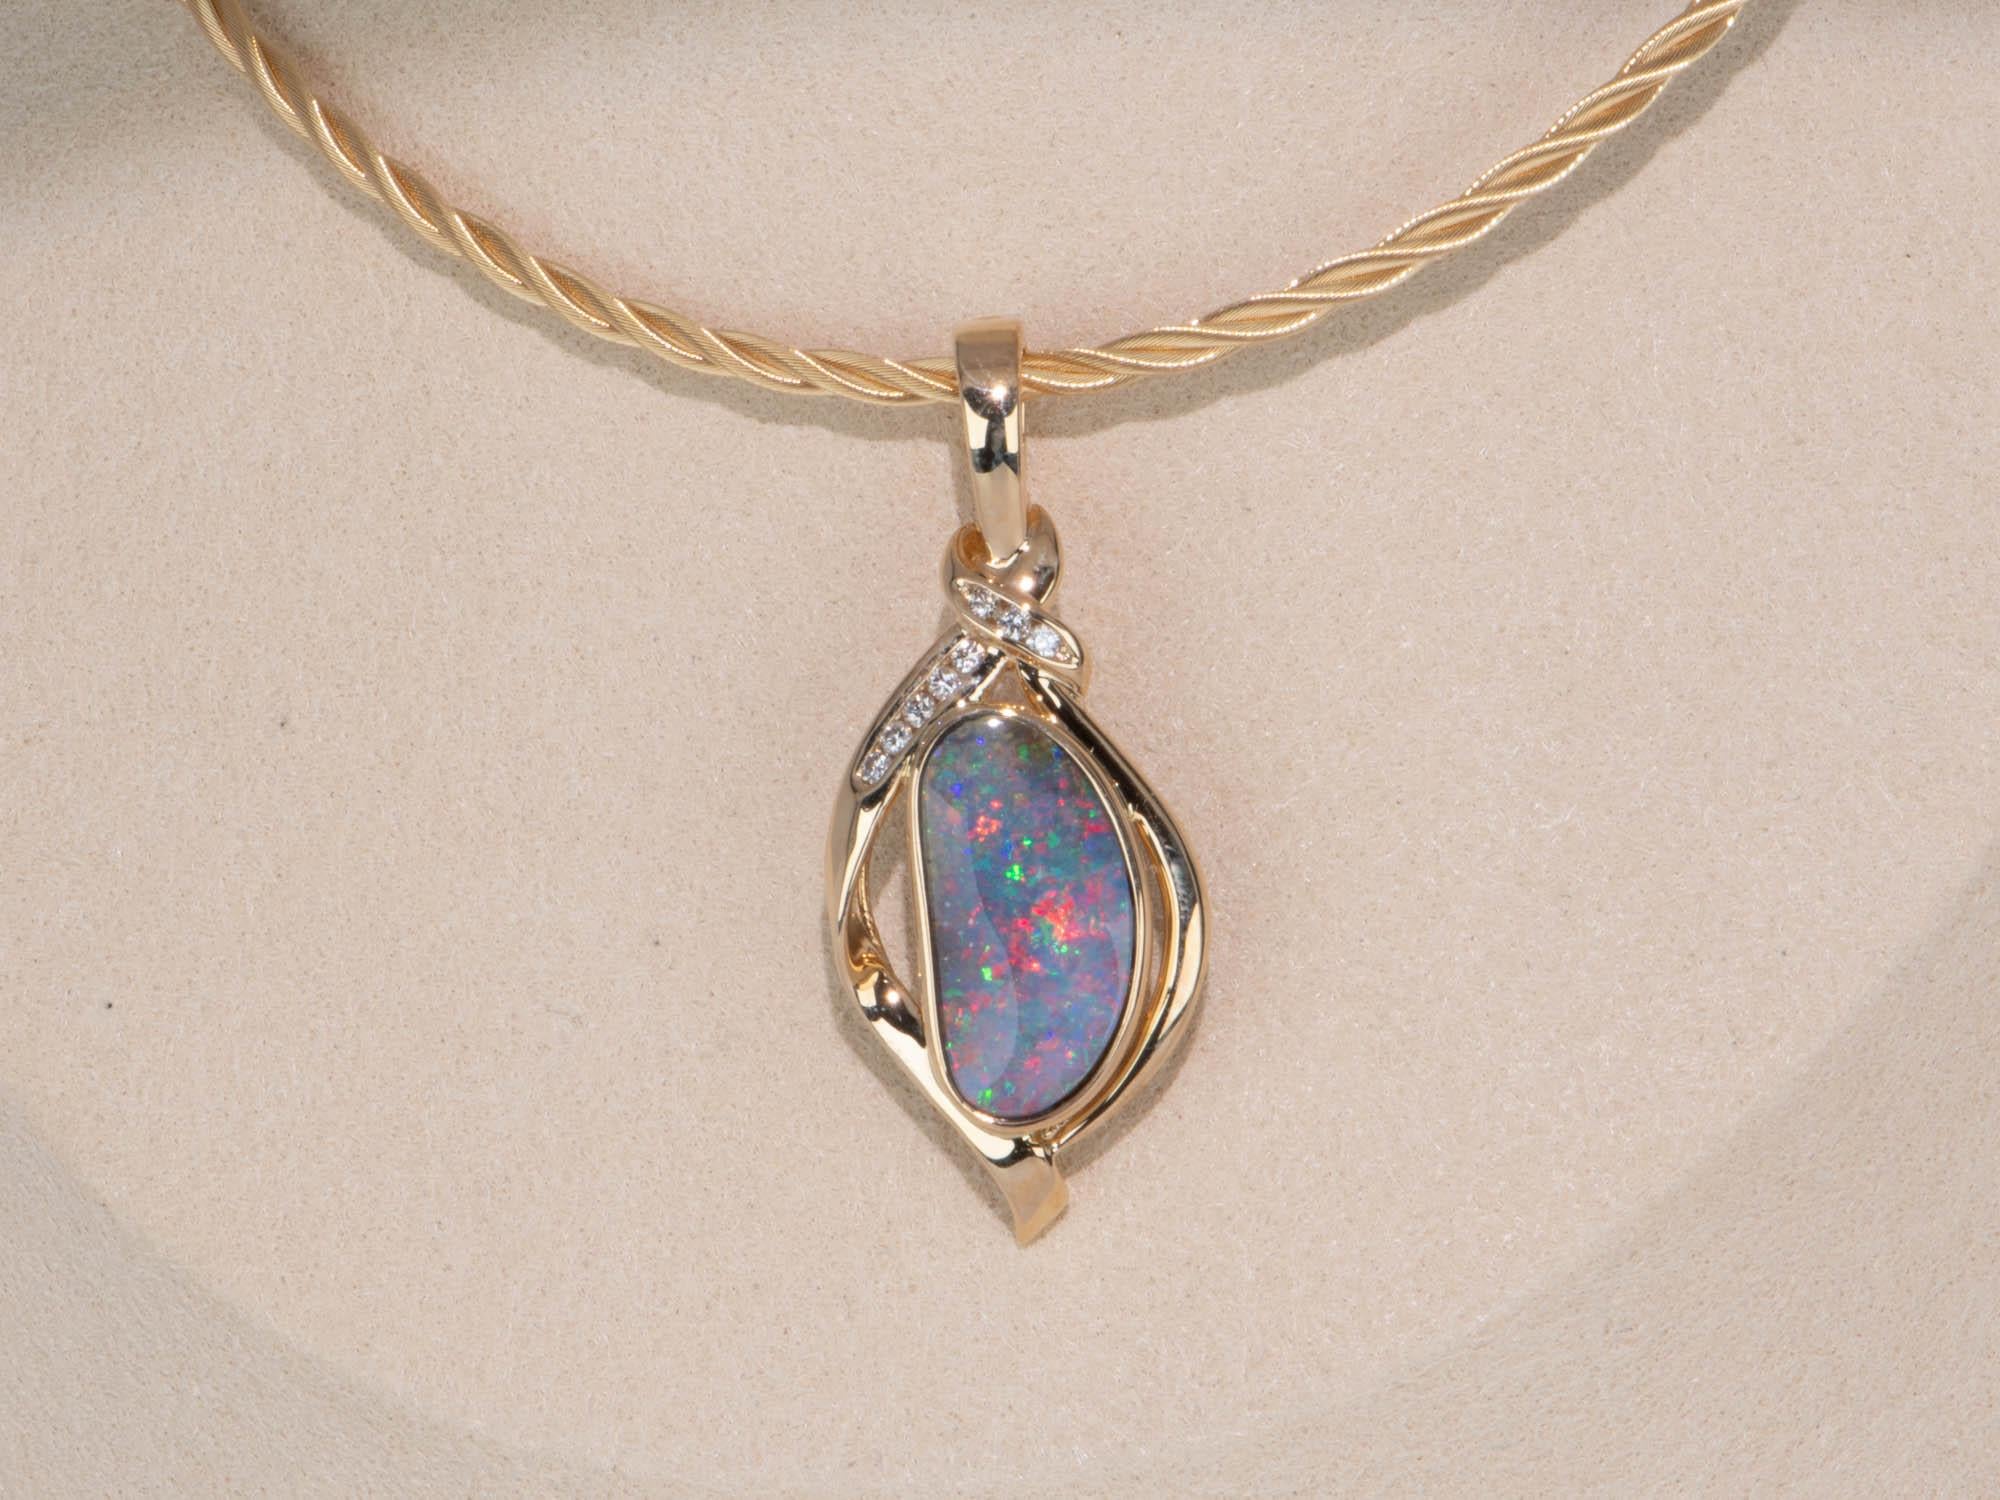 This stunning 5.85ct Australian Boulder Opal and Diamond Pendant will captivate you with its rainbow play of color and vibrant, bright colors. Set in lustrous 18K Gold, this pendant features a clip-on bail with a safety clasp so it can be added onto